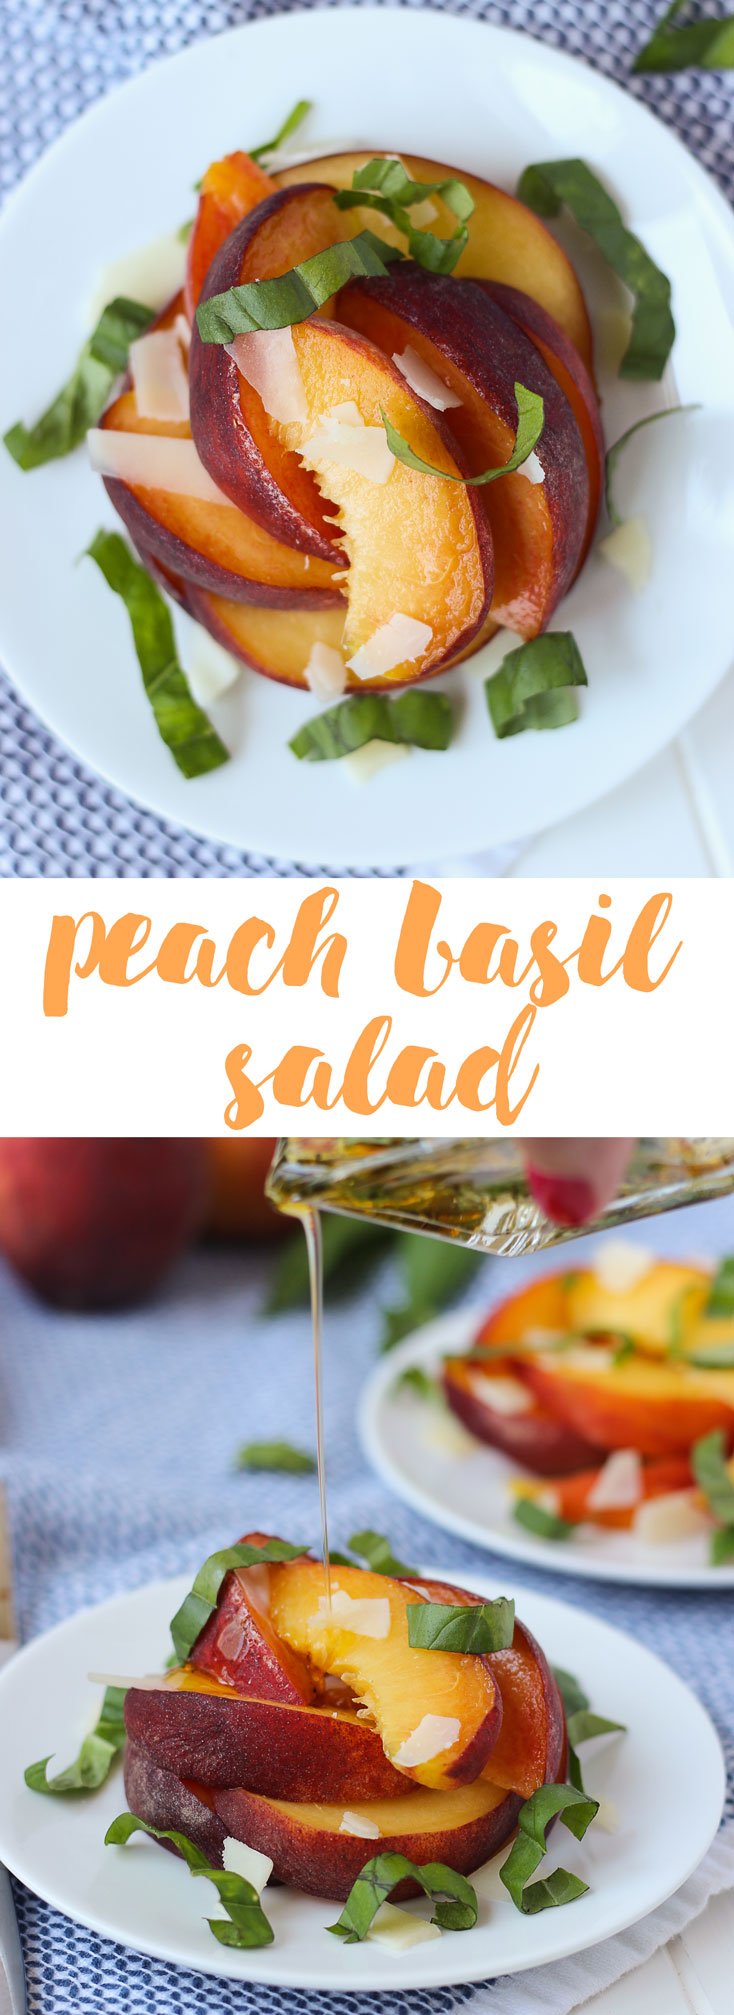 Peach Basil Salad is bursting with fresh summer flavors - ripe, juicy peaches paired with fruity and earthy gruyere cheese and fragrant basil leaves, tossed in a chipotle and peach dressing.